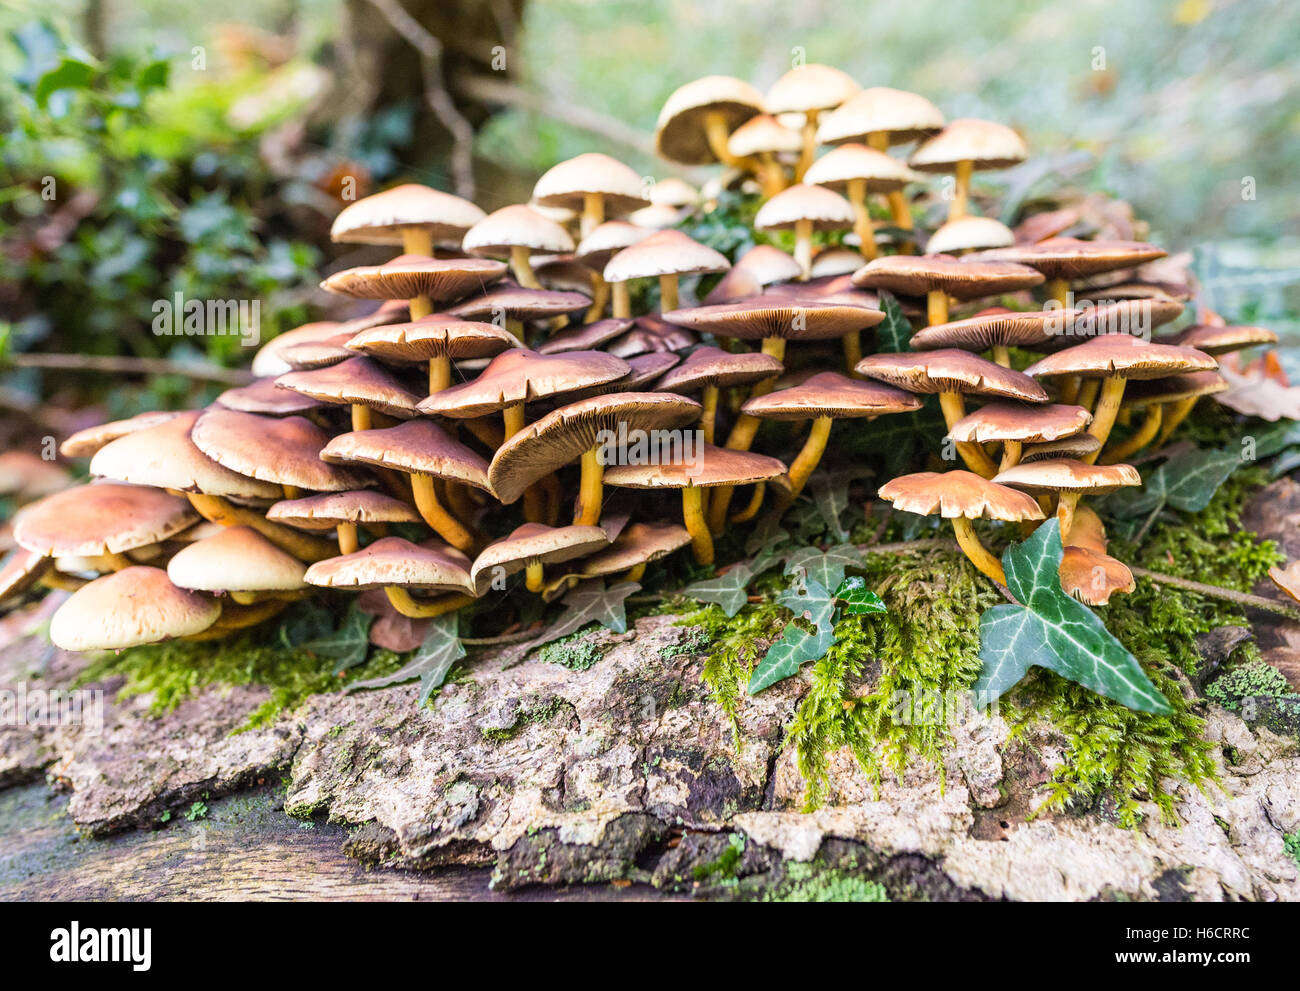 A cluster of toadstools growing on a fallen tree in the New Forest, Hampshire, UK. Stock Photo